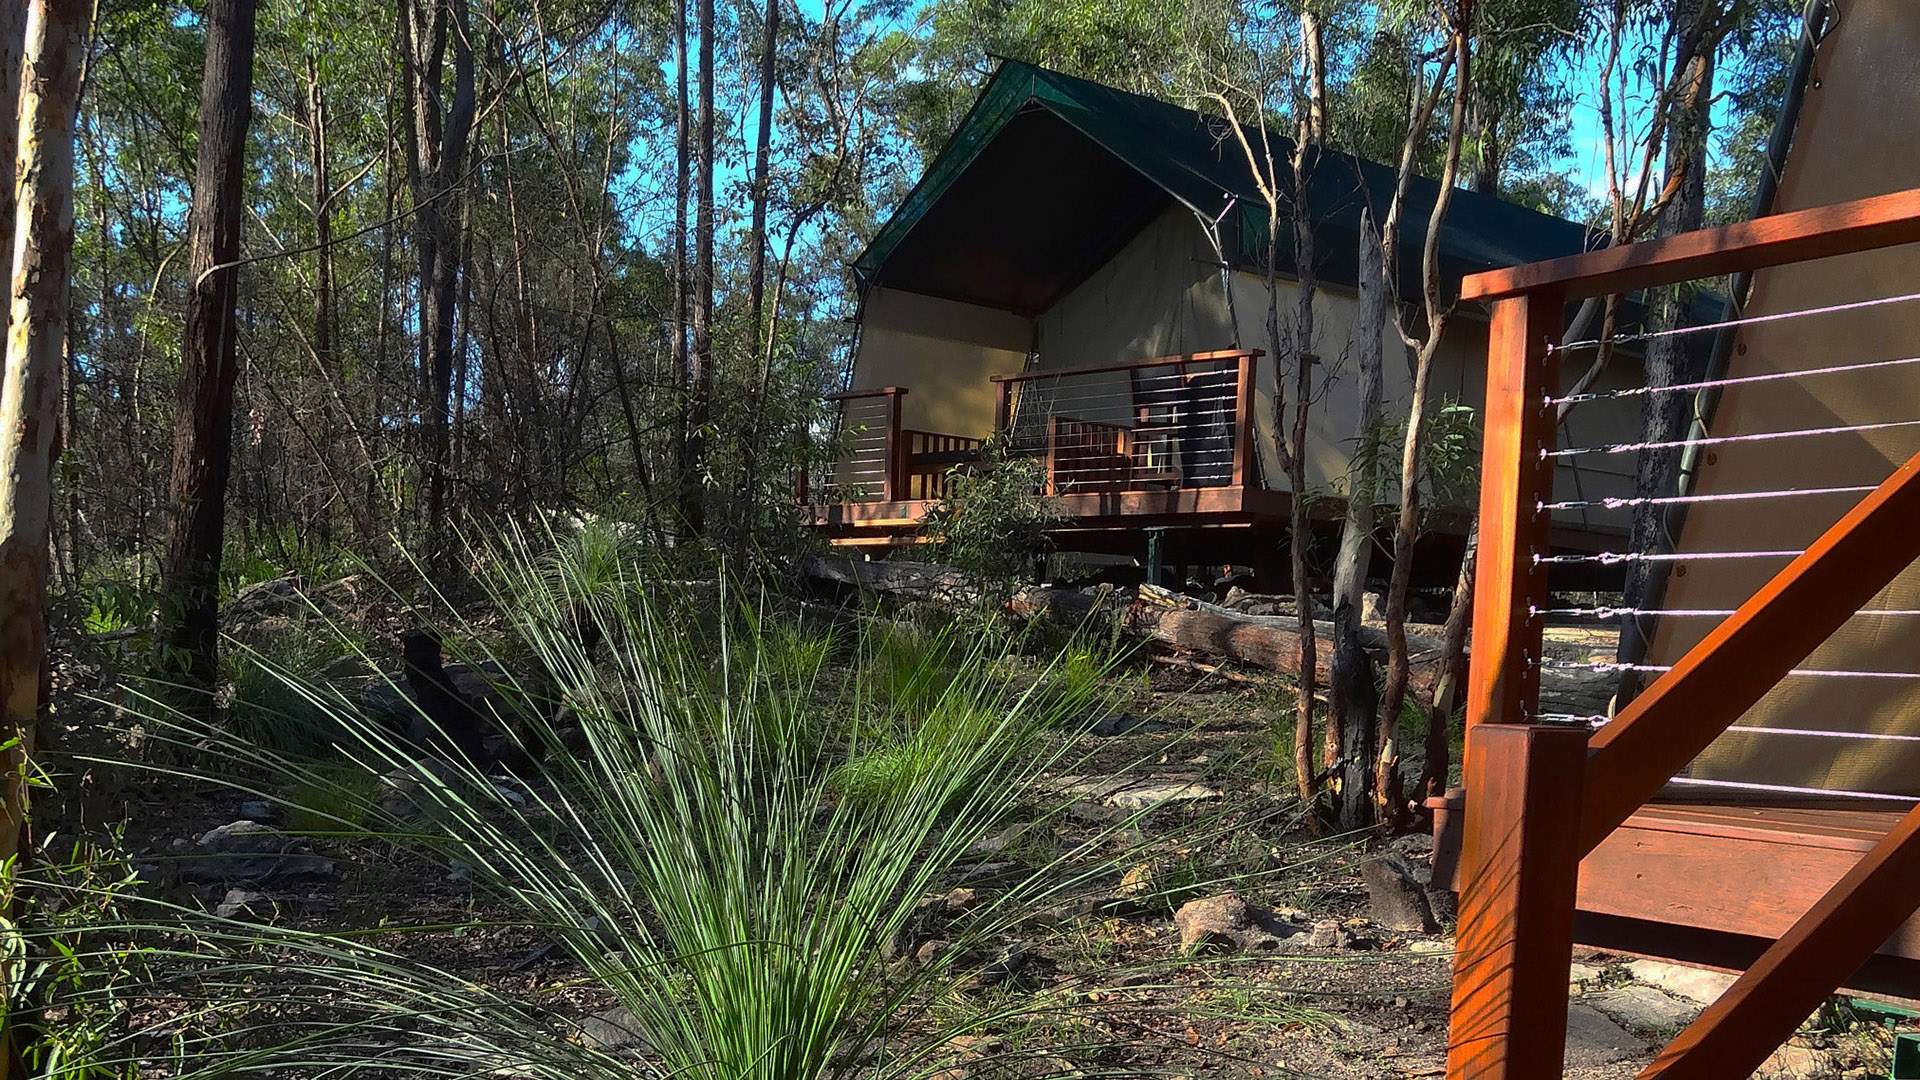 Murphy's Creek Escape - some of the best glamping near Brisbane, Queensland.